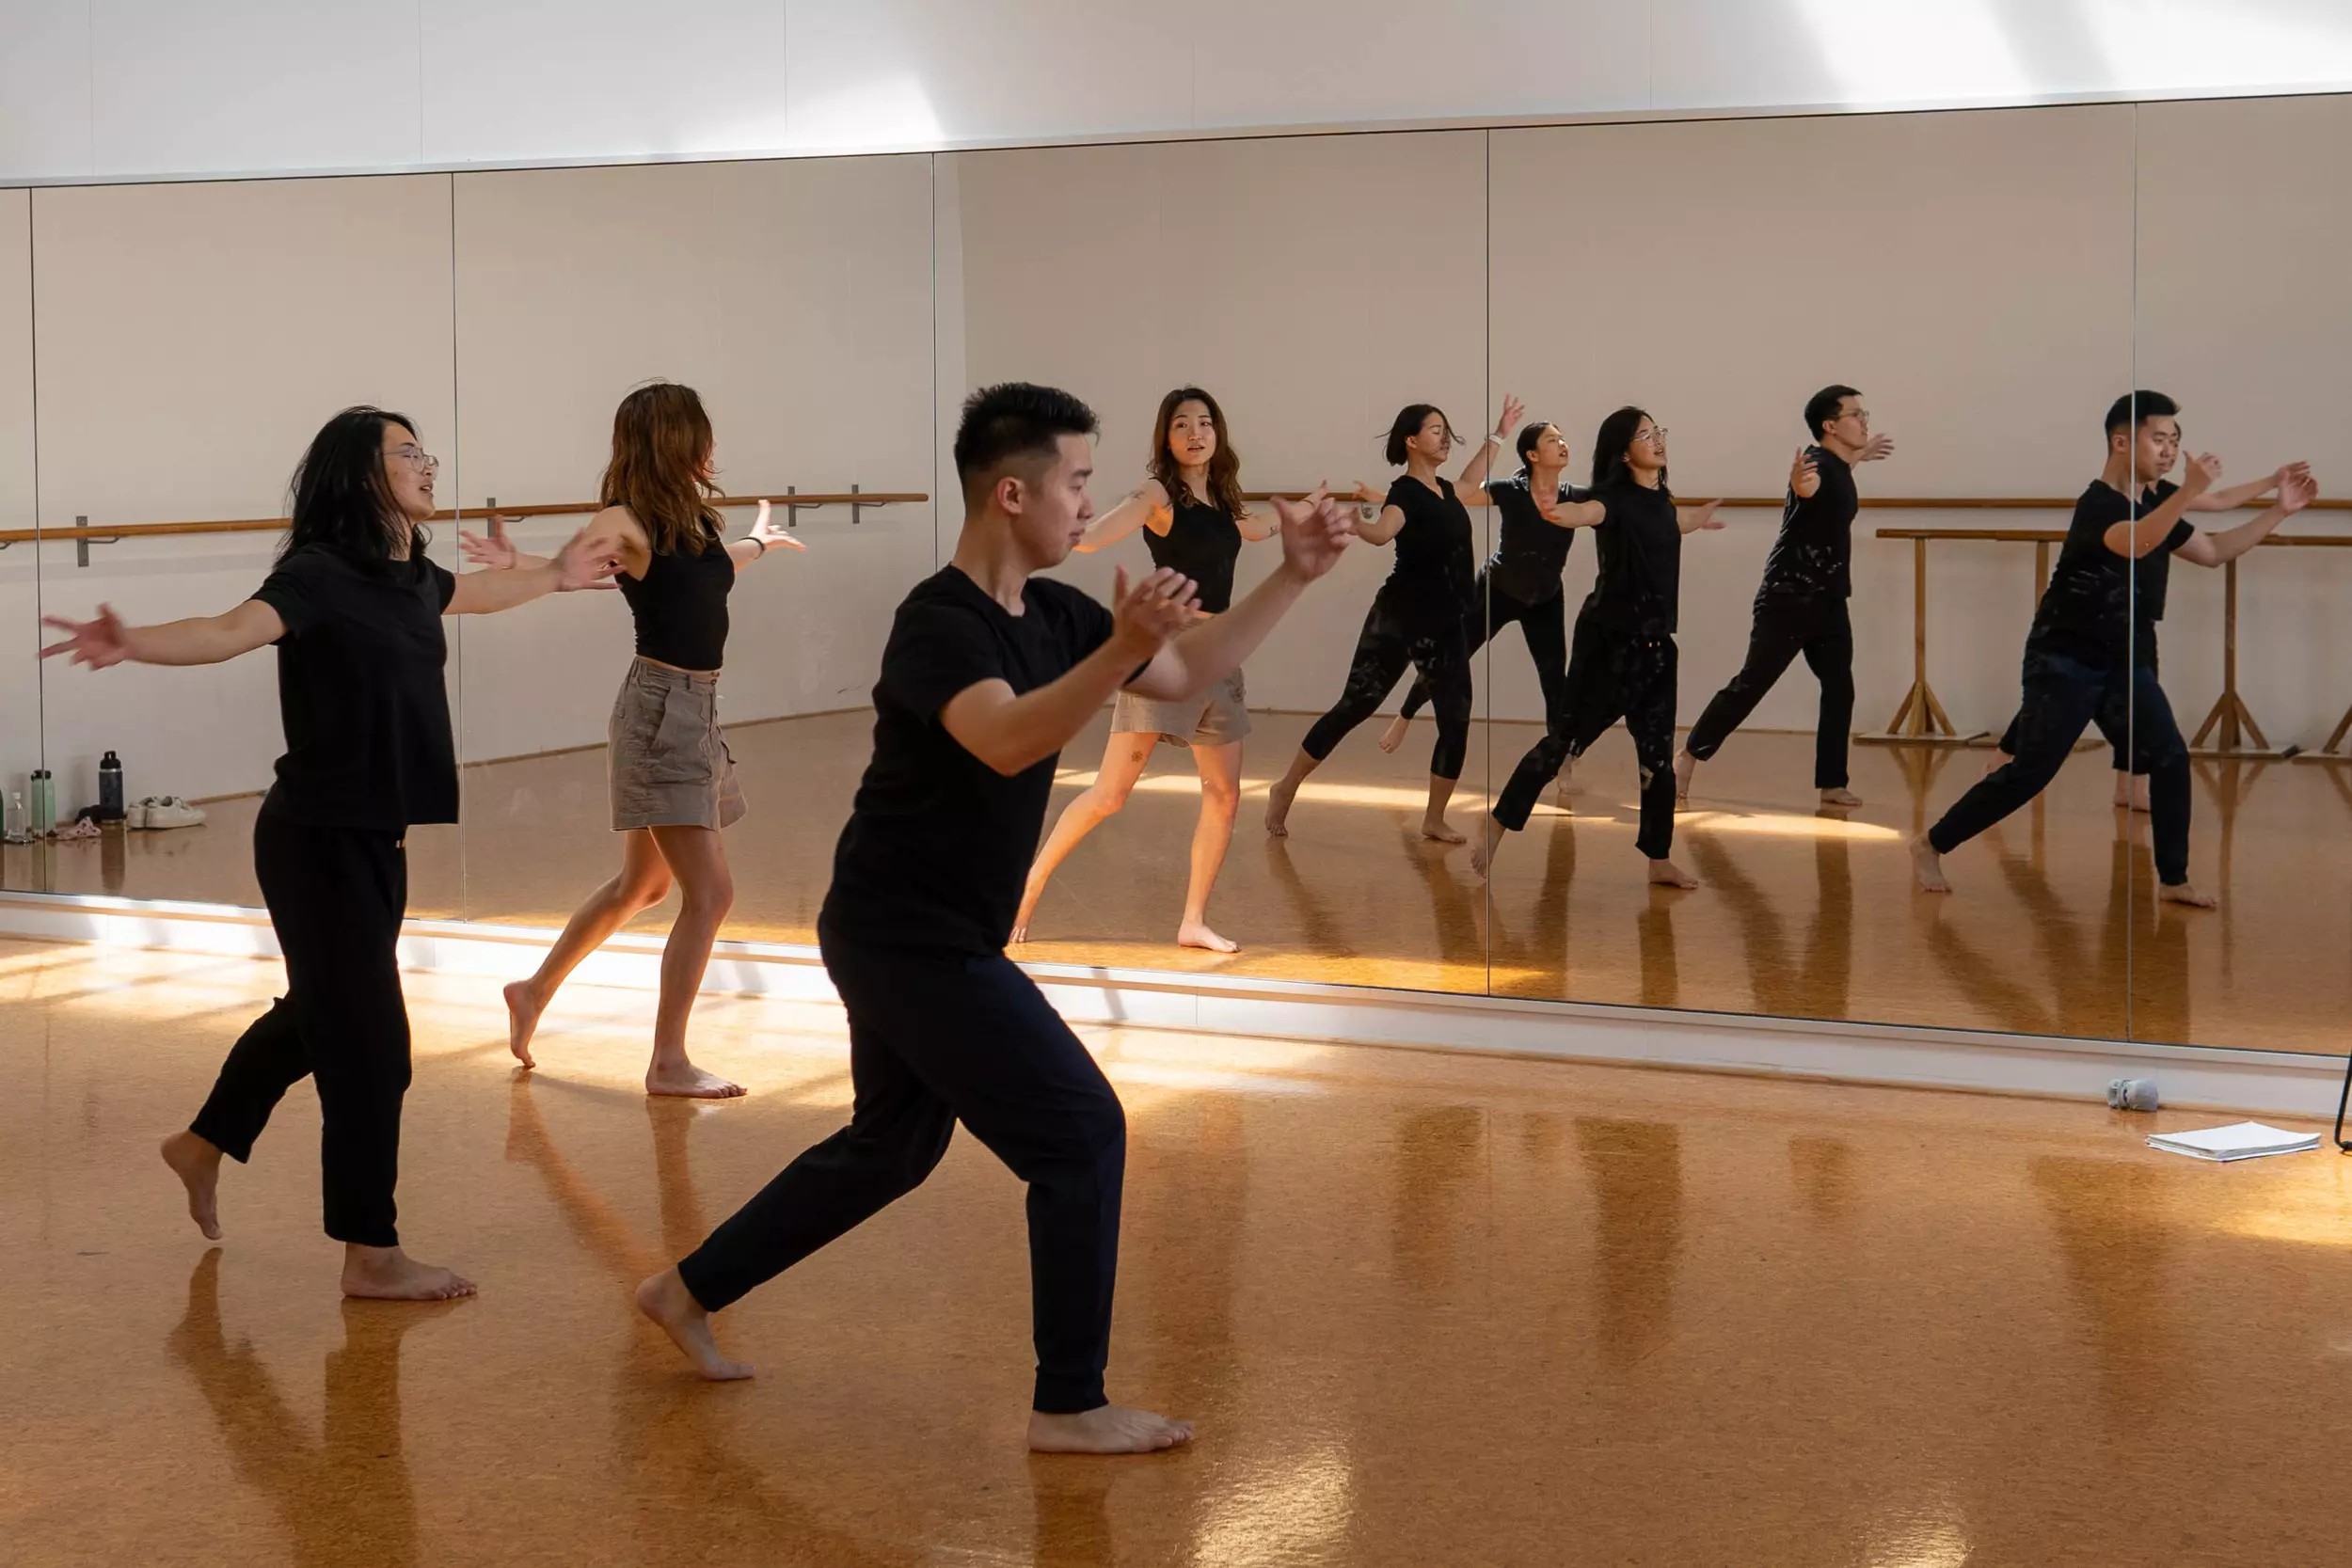 Three Asian dancers, dressed mostly in black rehearsal clothes, practising in a mirrored dance studio.